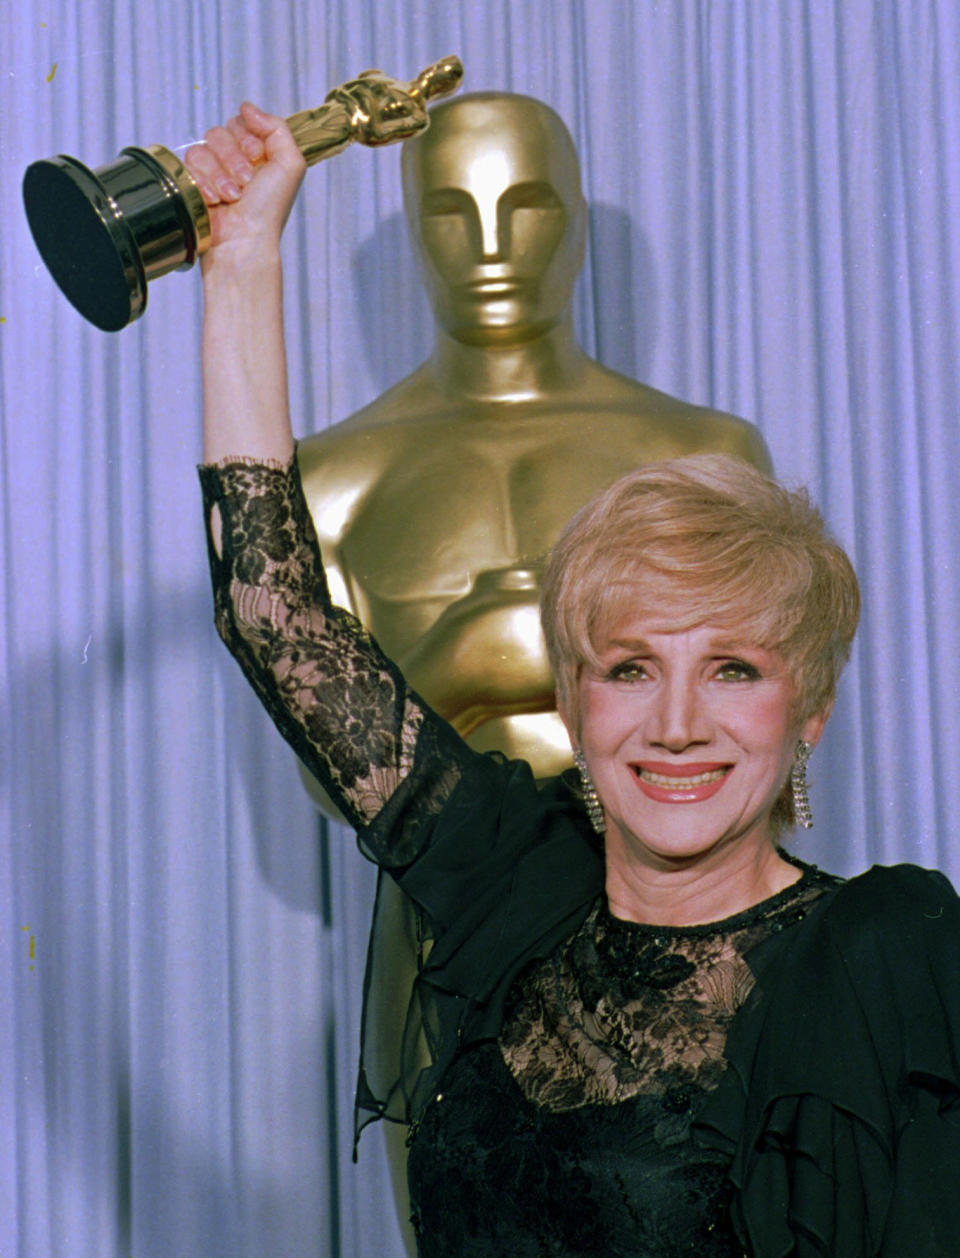 FILE - In this April 11, 1988 file photo, Olympia Dukakis holds her Oscar at the Shrine Auditorium in Los Angles after being honored at the 60th Academy Awards as best supporting actress for her role in "Moonstrck." Olympia Dukakis, the veteran stage and screen actress whose flair for maternal roles helped her win an Oscar as Cher’s mother in the romantic comedy “Moonstruck,” has died. She was 89. (AP Photo/Lennox Mcleondon, File)